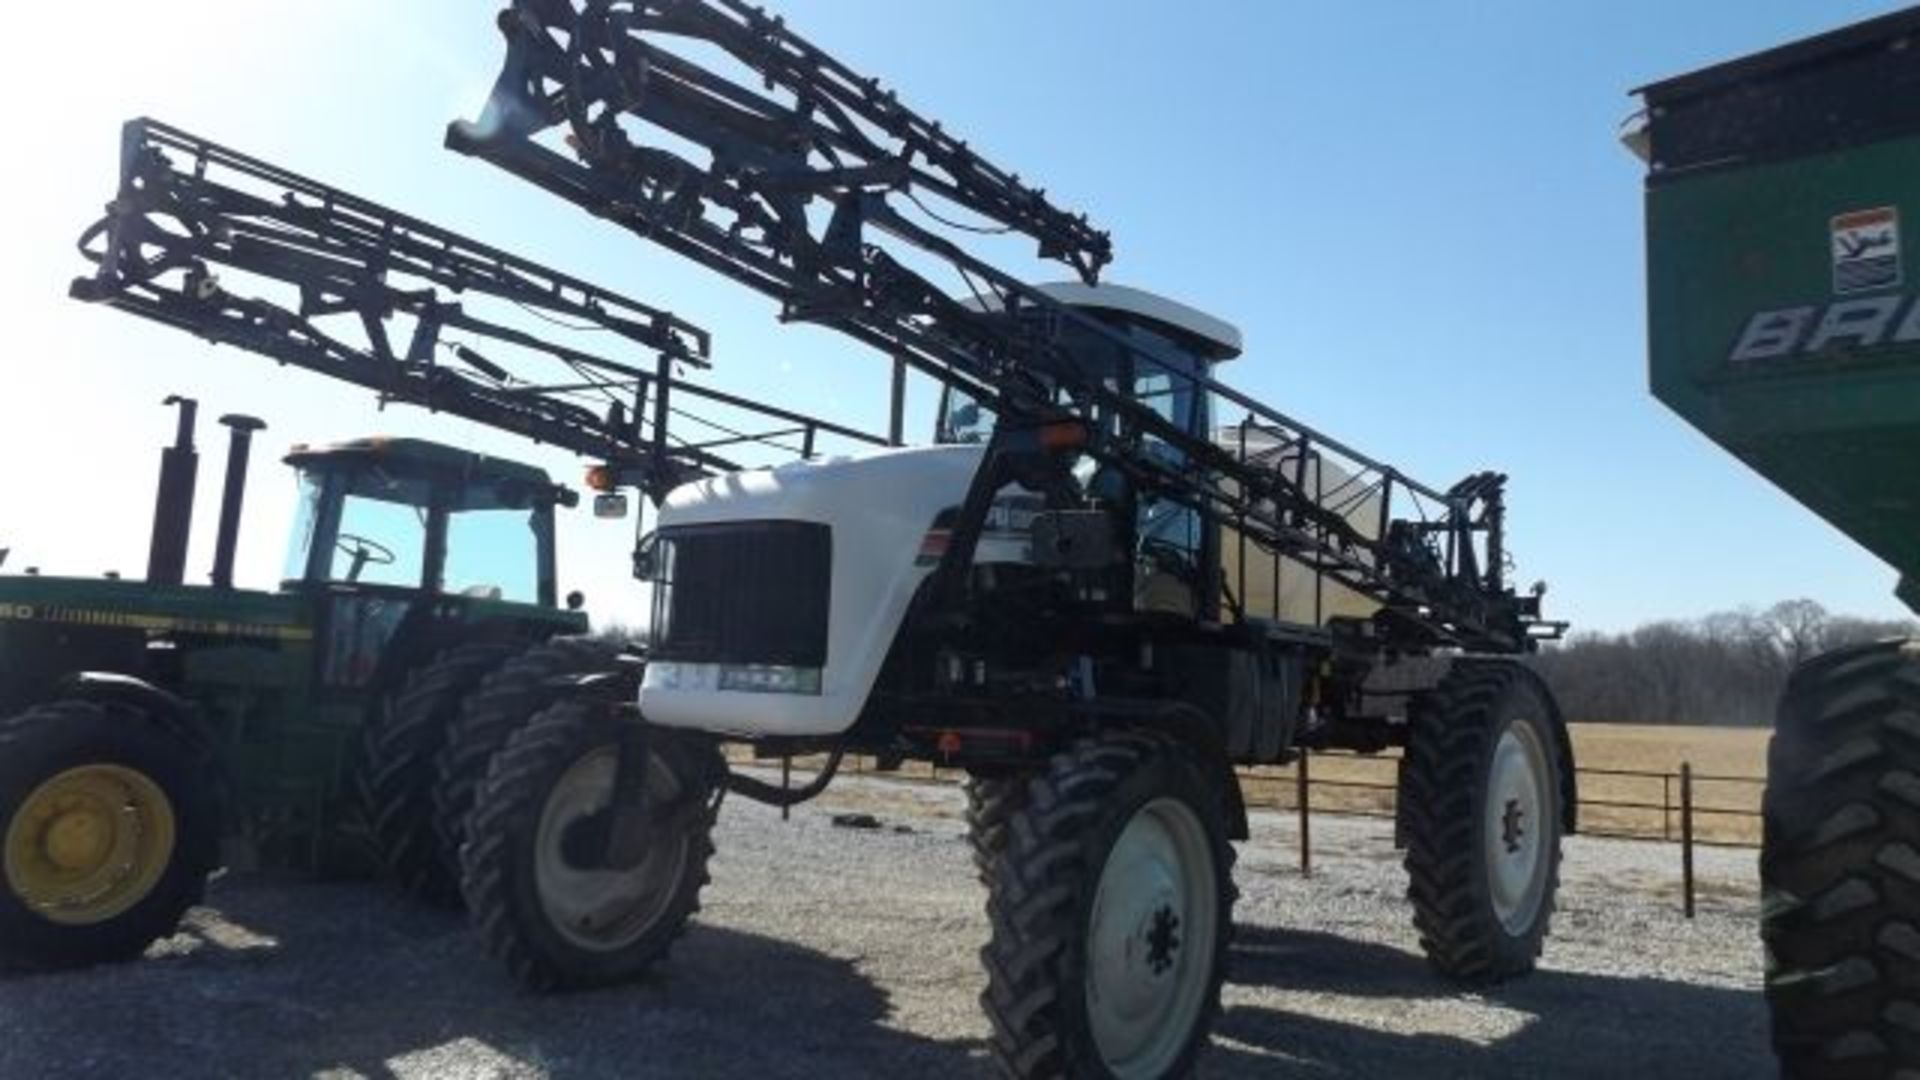 Spray Coupe 7650,2005 #153442,Sprayer, Hydro, Diesel, Rear Tires: Fs380-90r46, Front Tires: F.S.